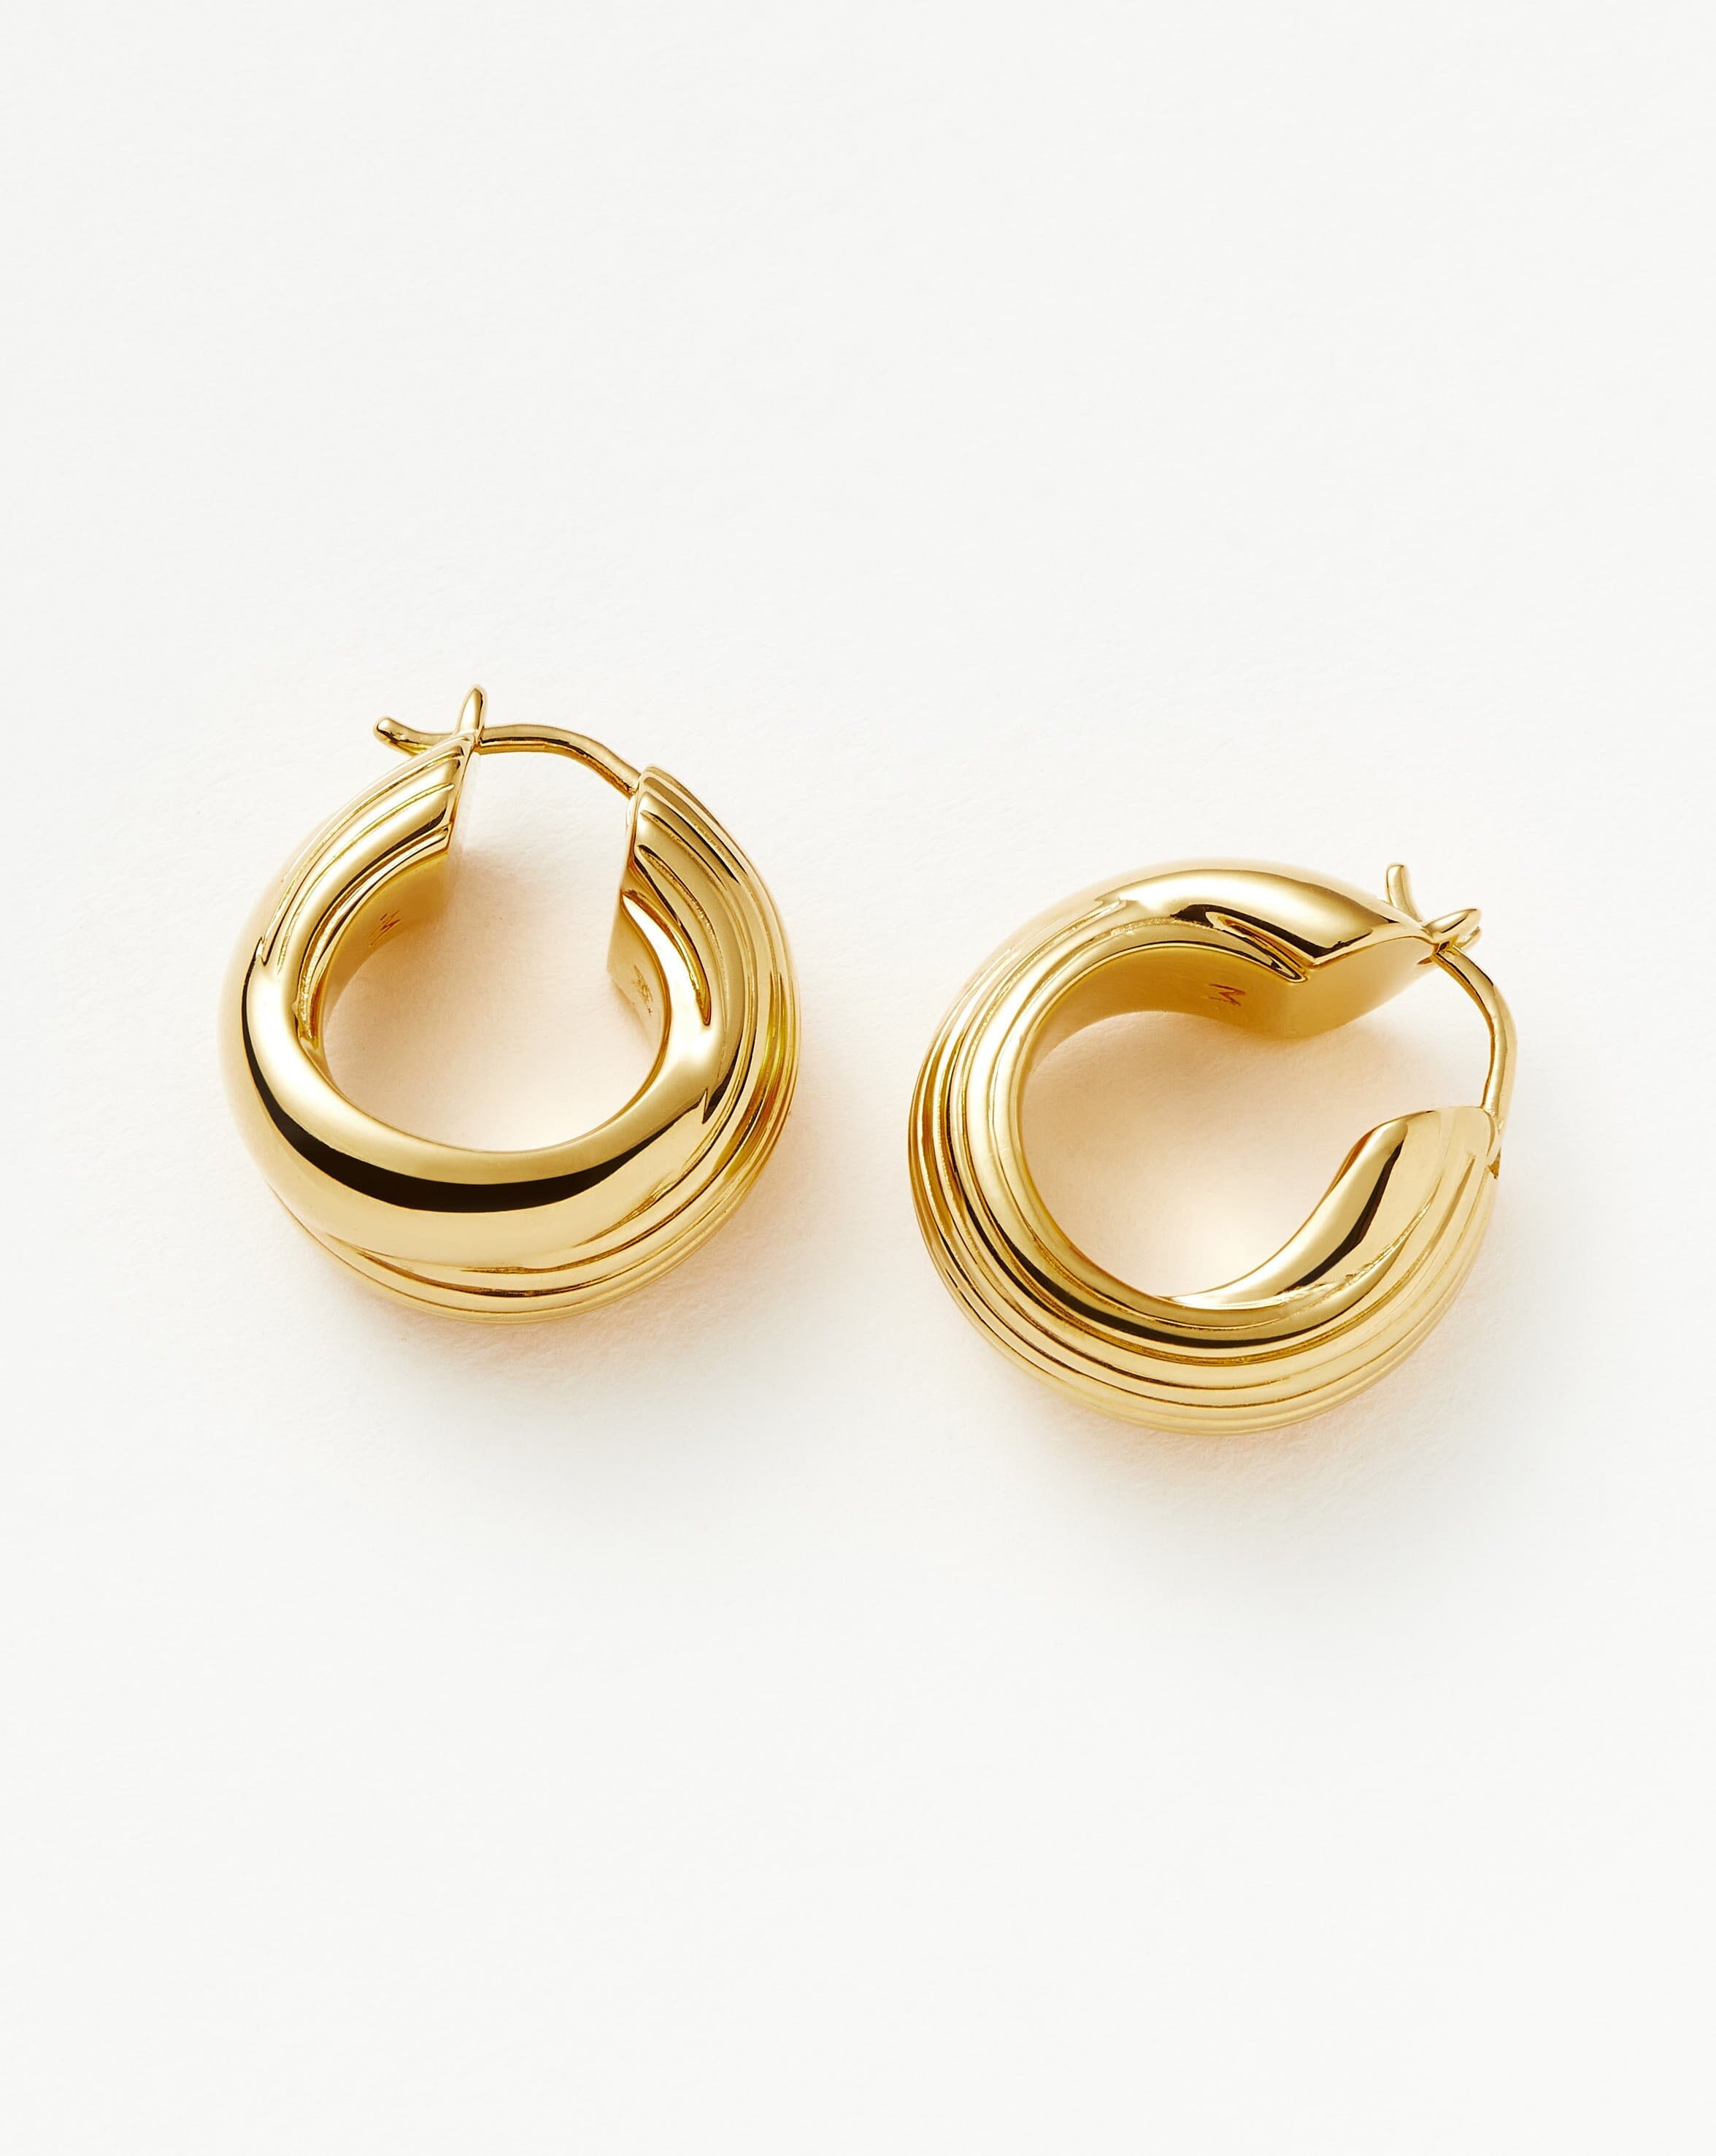 Lucy Williams Chunky Entwine Ridge Small Hoop Earrings | 18ct Gold Plated Earrings Missoma 